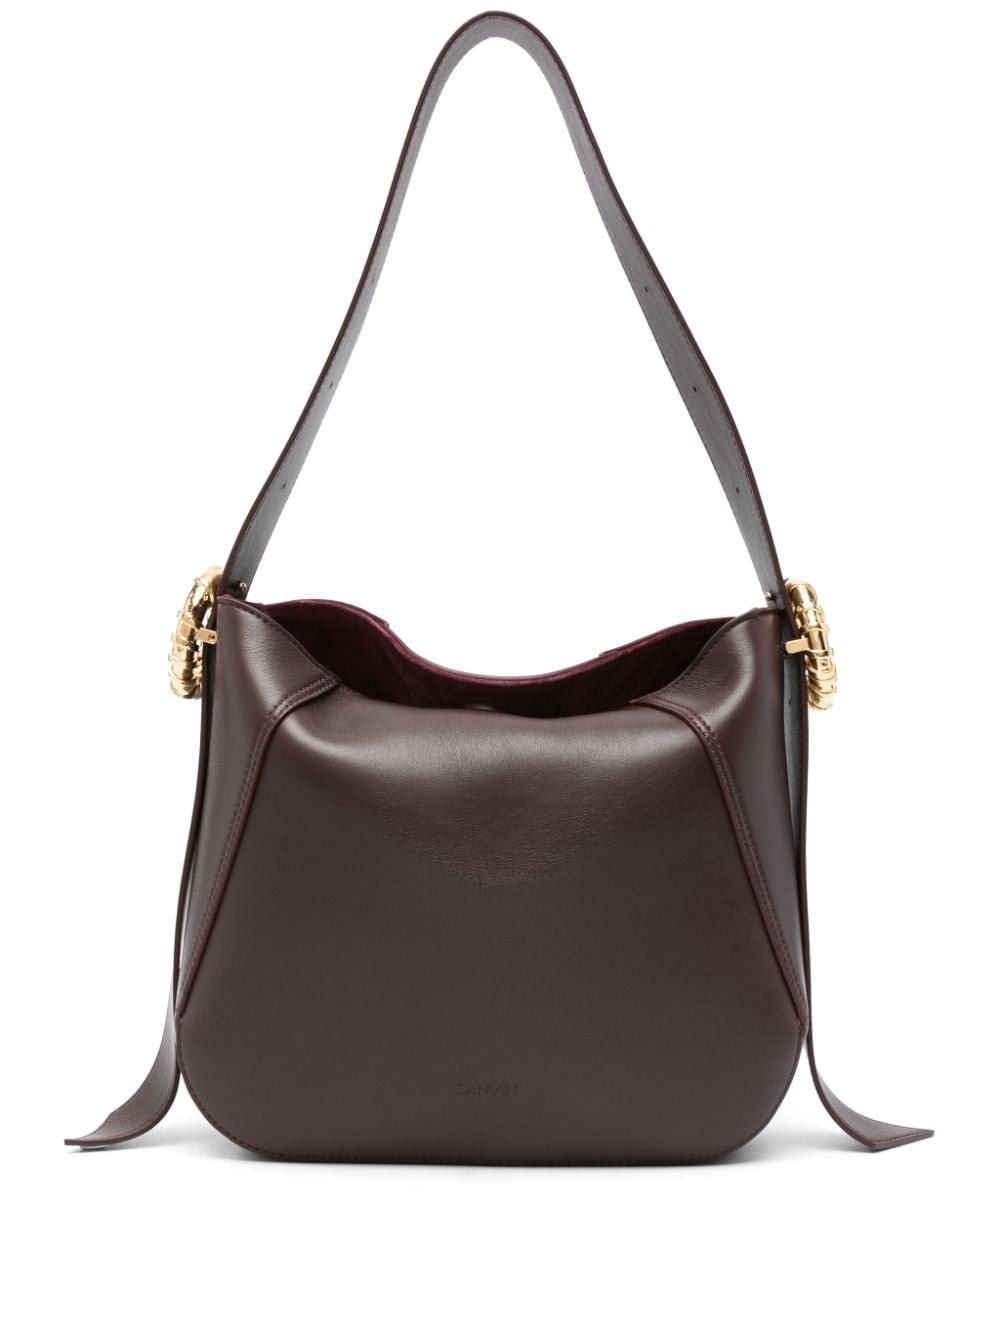 LANVIN Luxurious Burgundy Suede Hobo Bag for Women - FW23 Collection